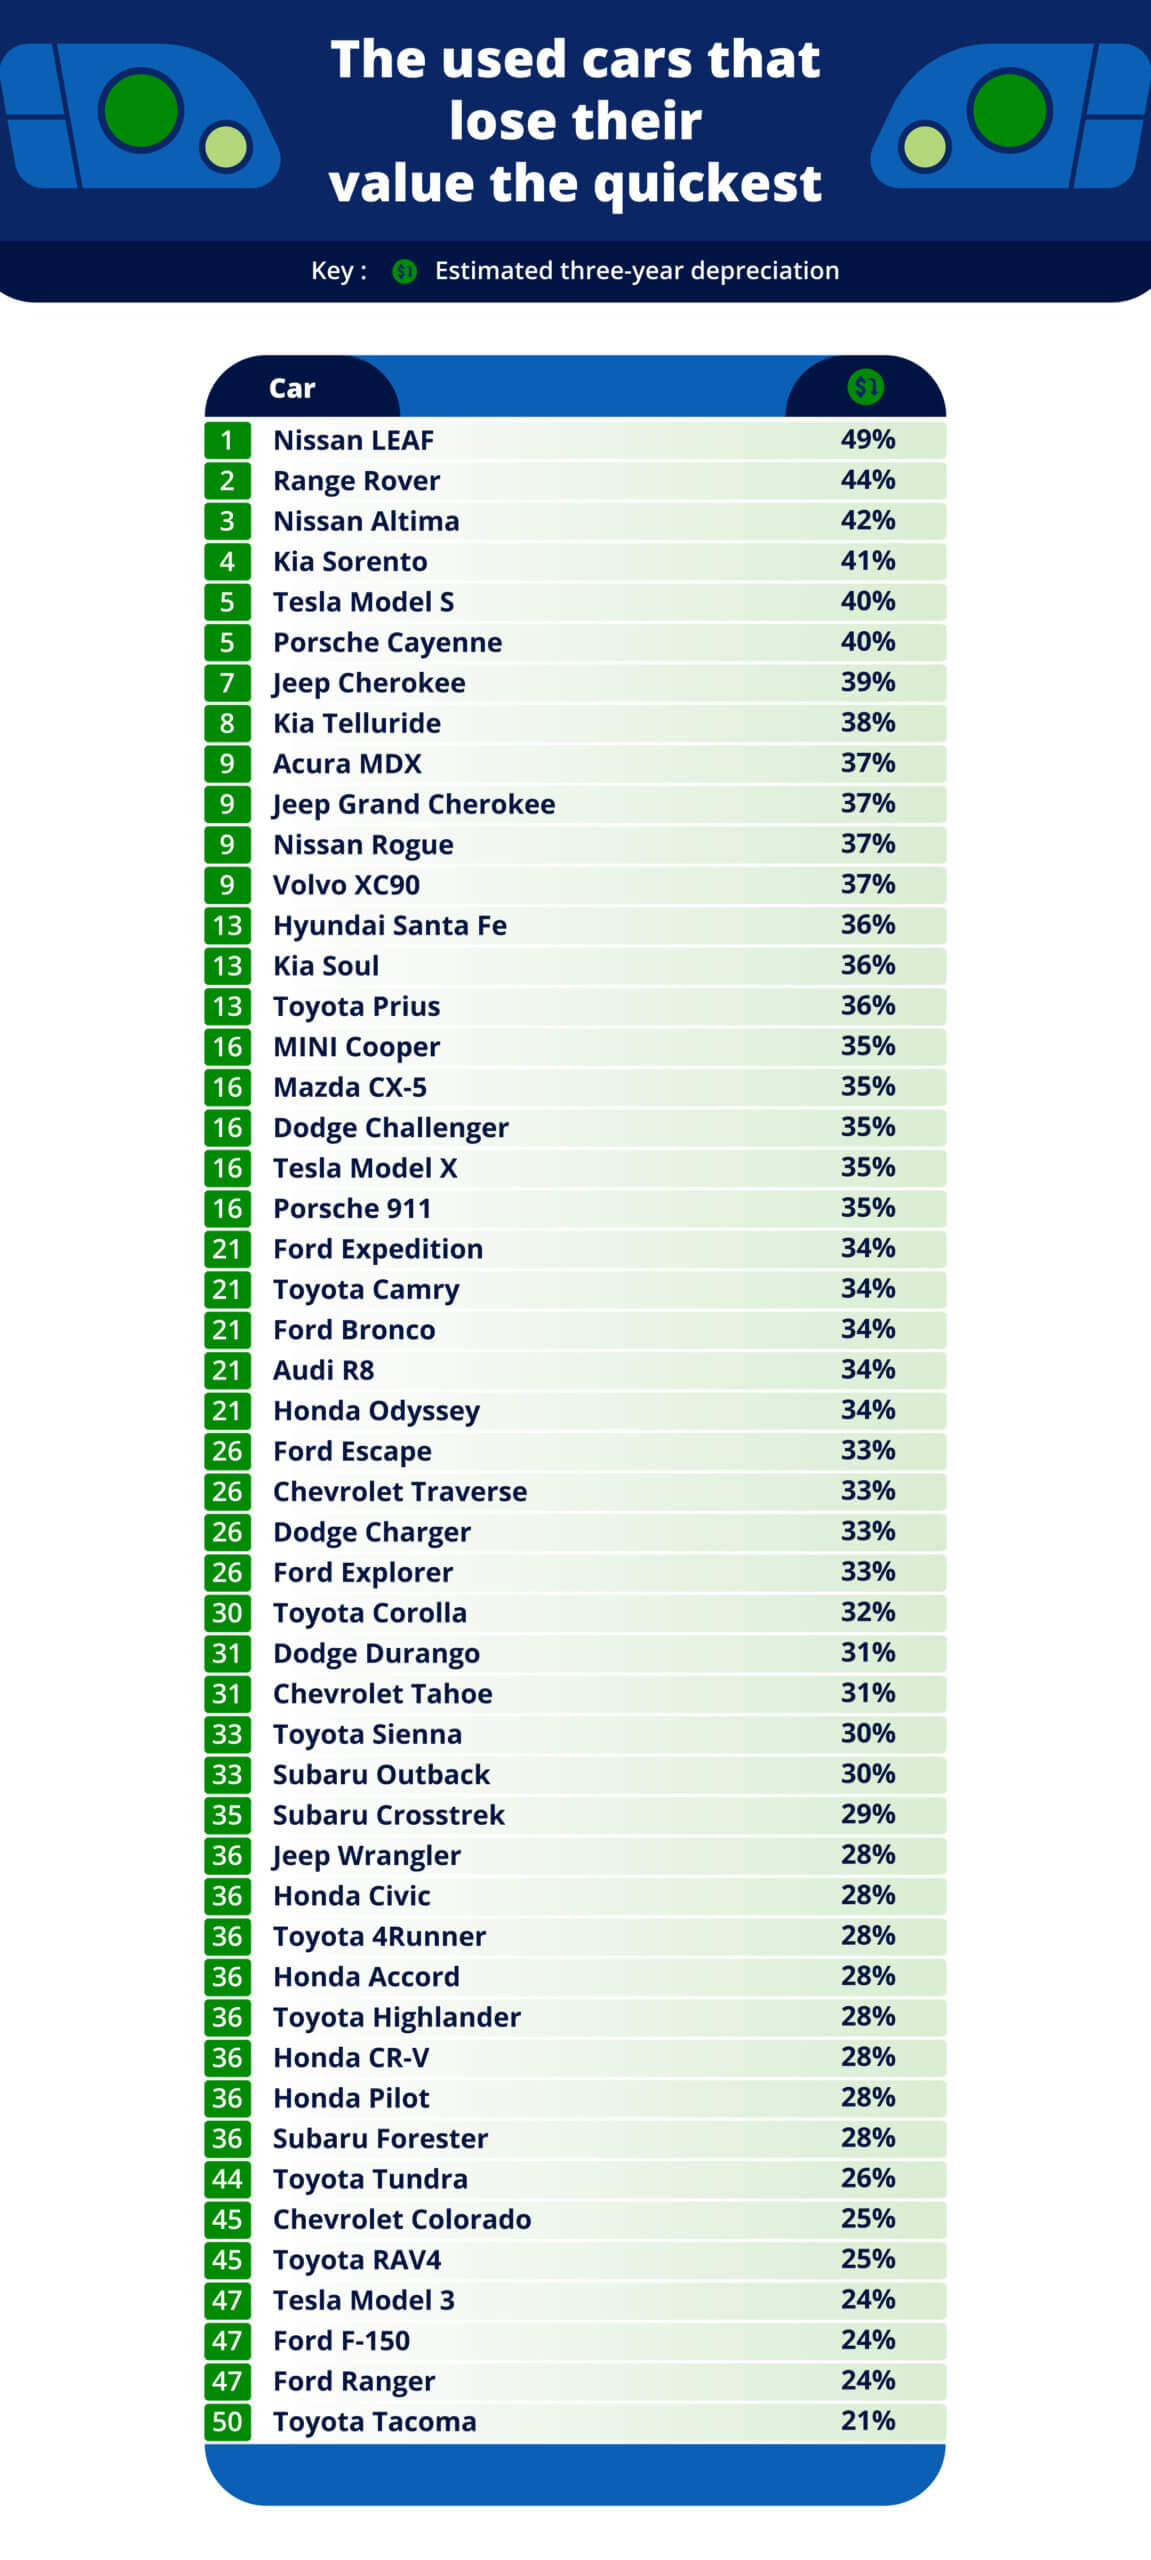 Table showing the top 50 used cars that lose their value the quickest.